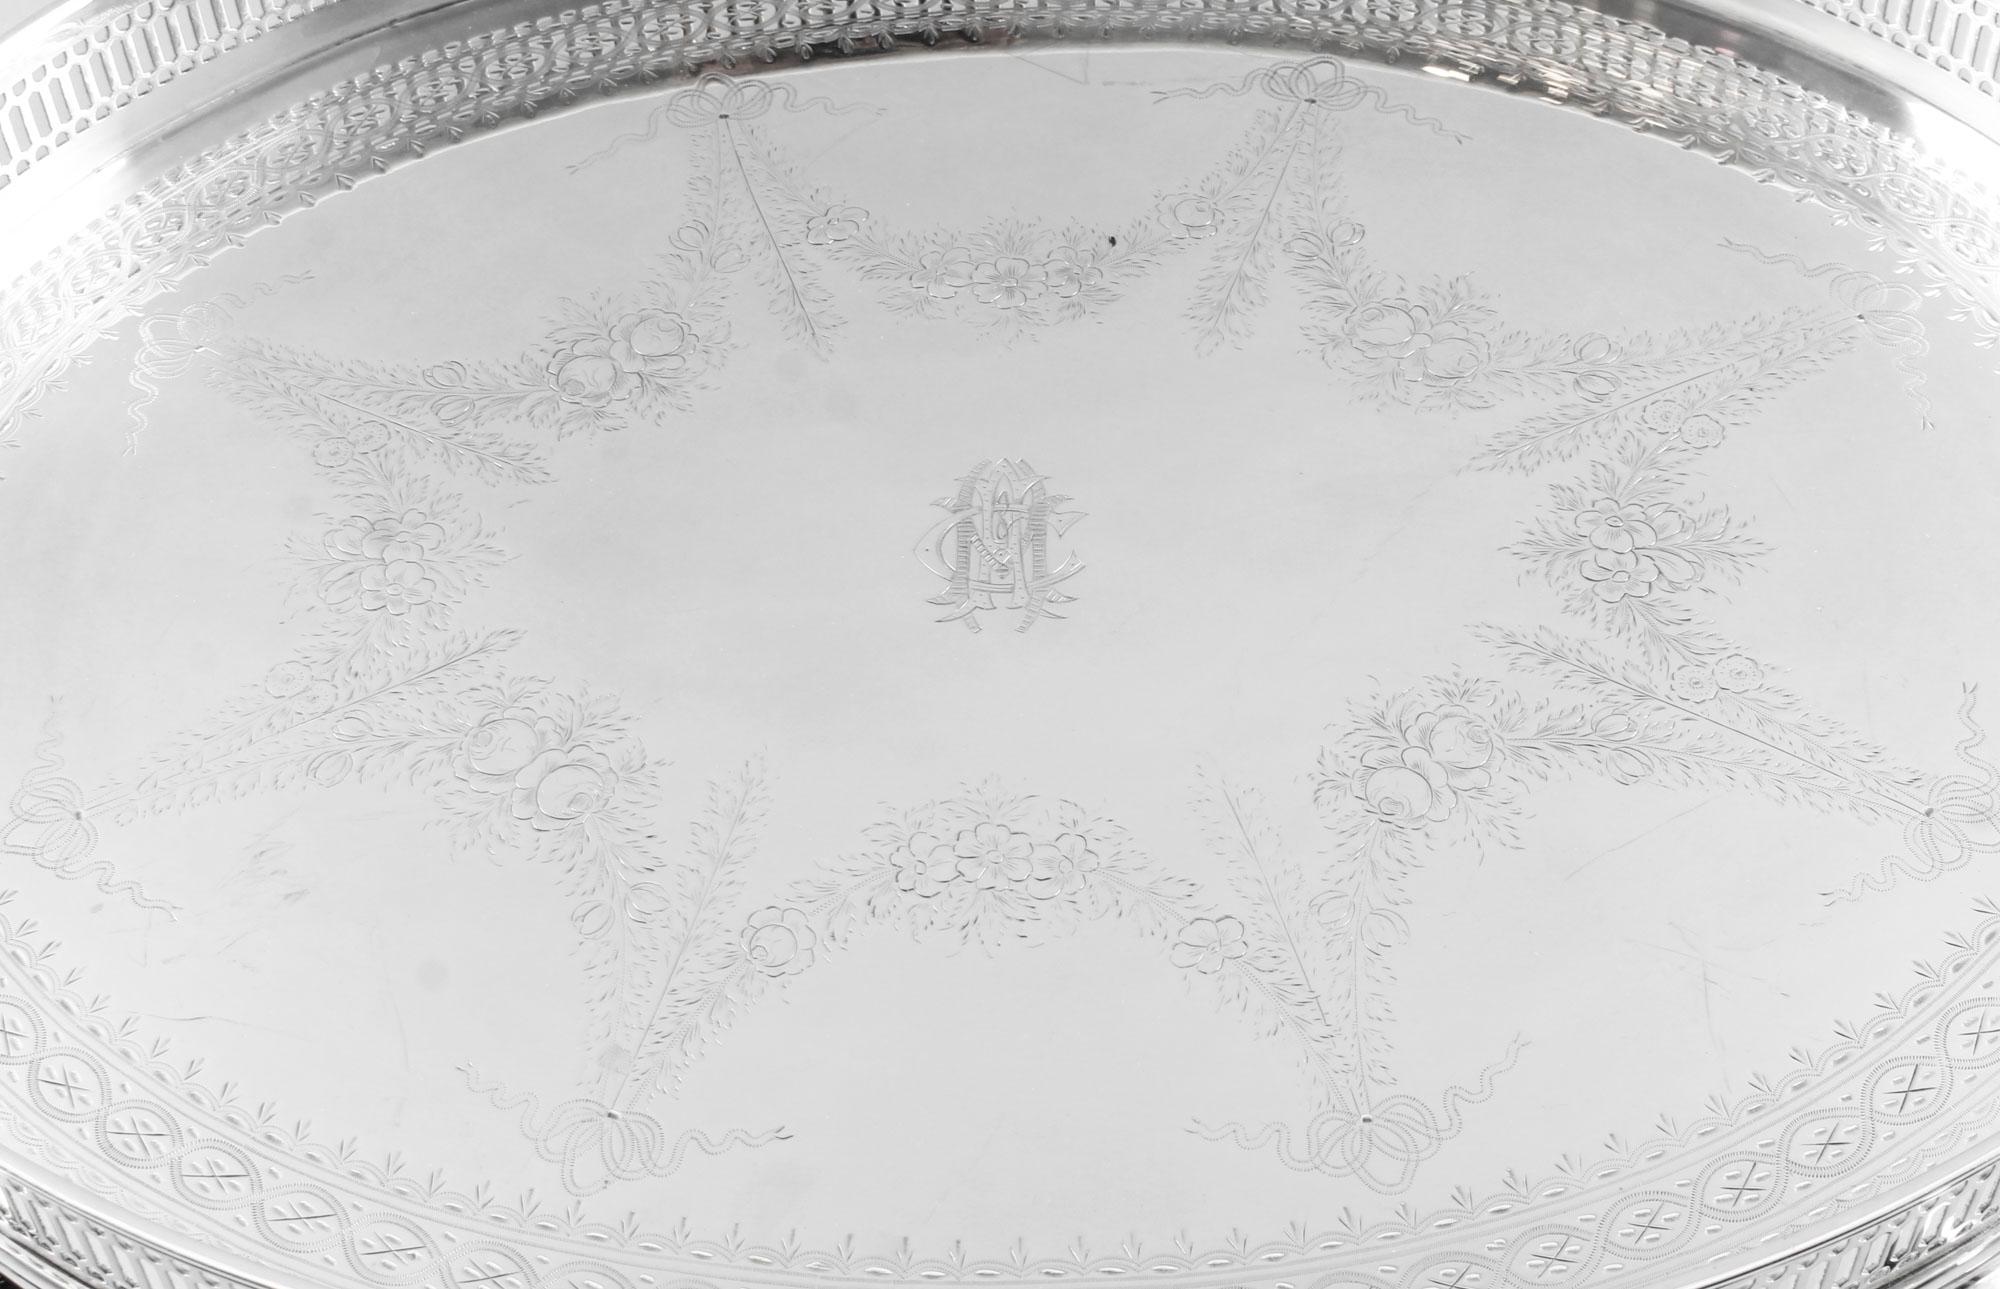 English Antique Edwardian Silver Plated Gallery Tray, circa 19th Century